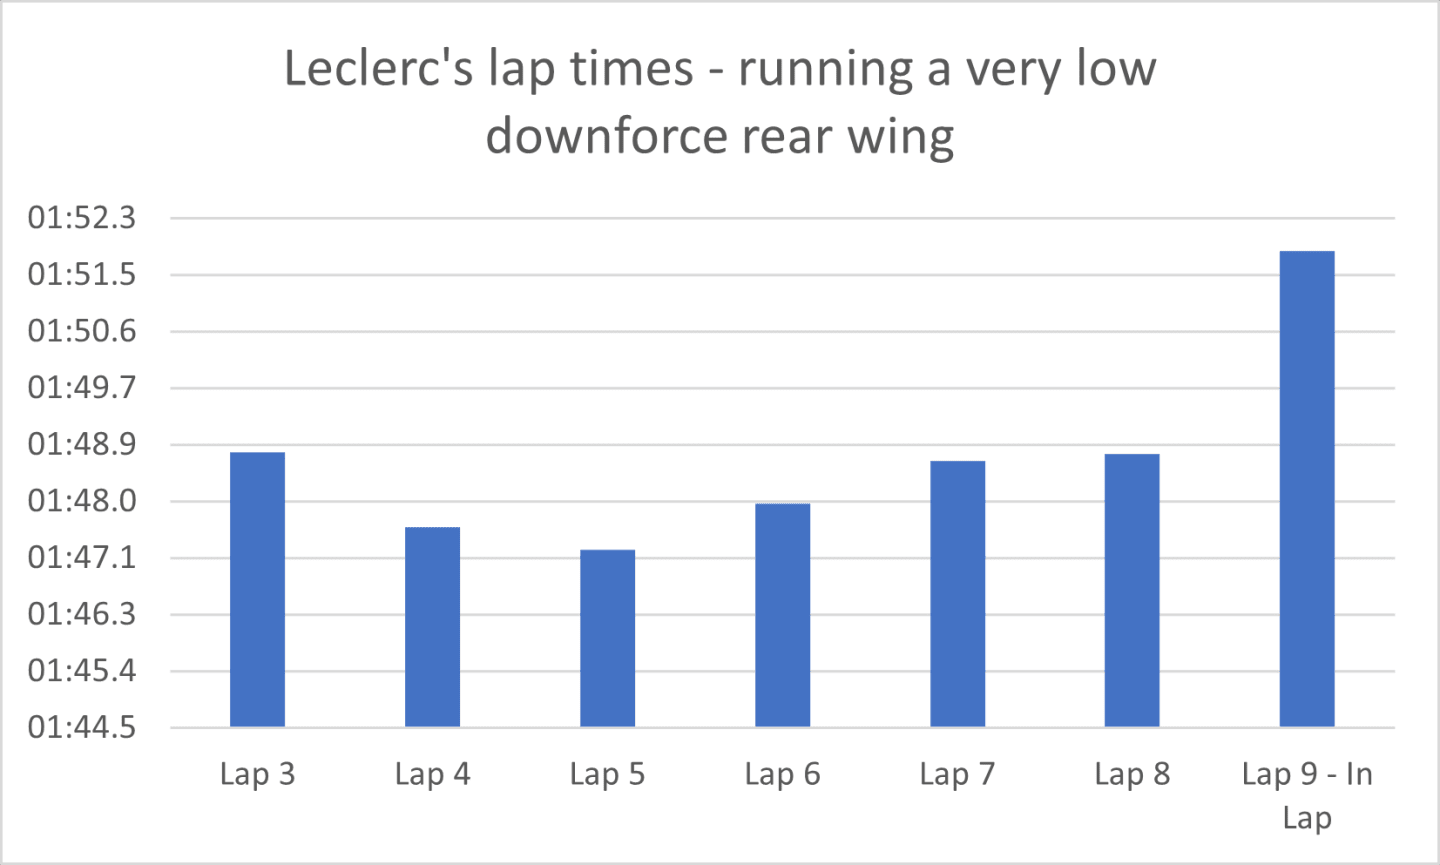 Higher levels of tyre degradation meant Leclerc stopped first of the front runners, and had a very slow in-lap